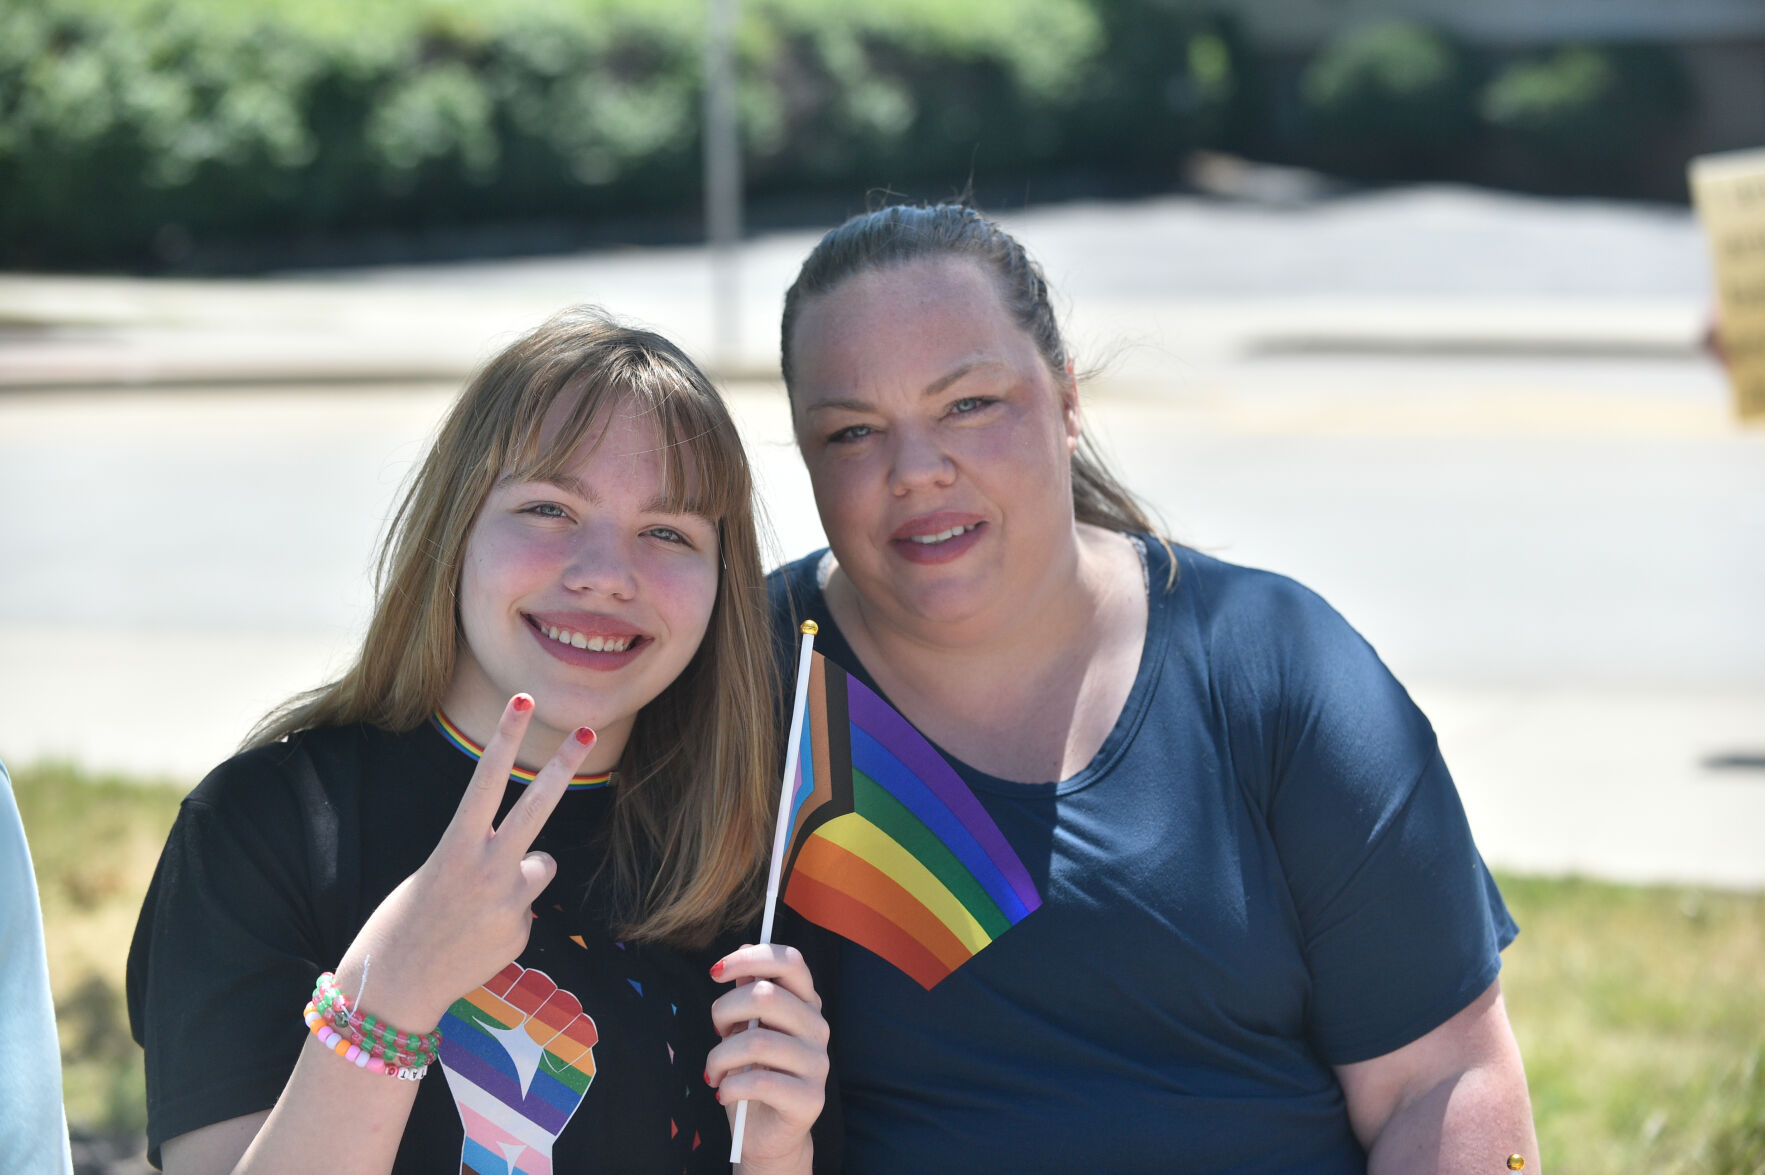 Racine LGBT Center looks to add new staff, focus on equity and youth events picture pic picture